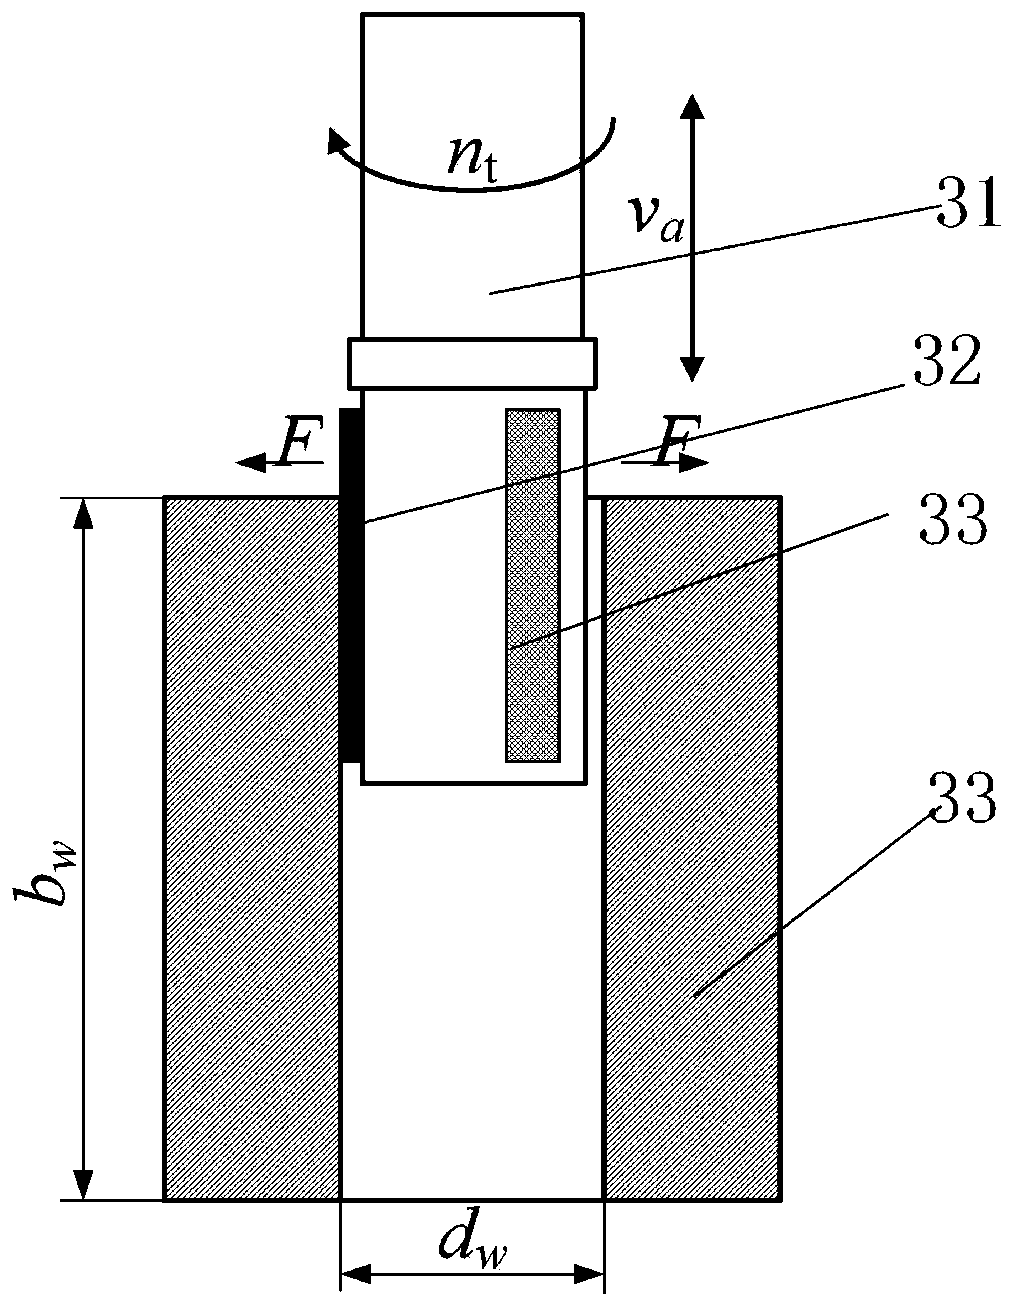 Honing surface roughness prediction method considering oilstone yielding